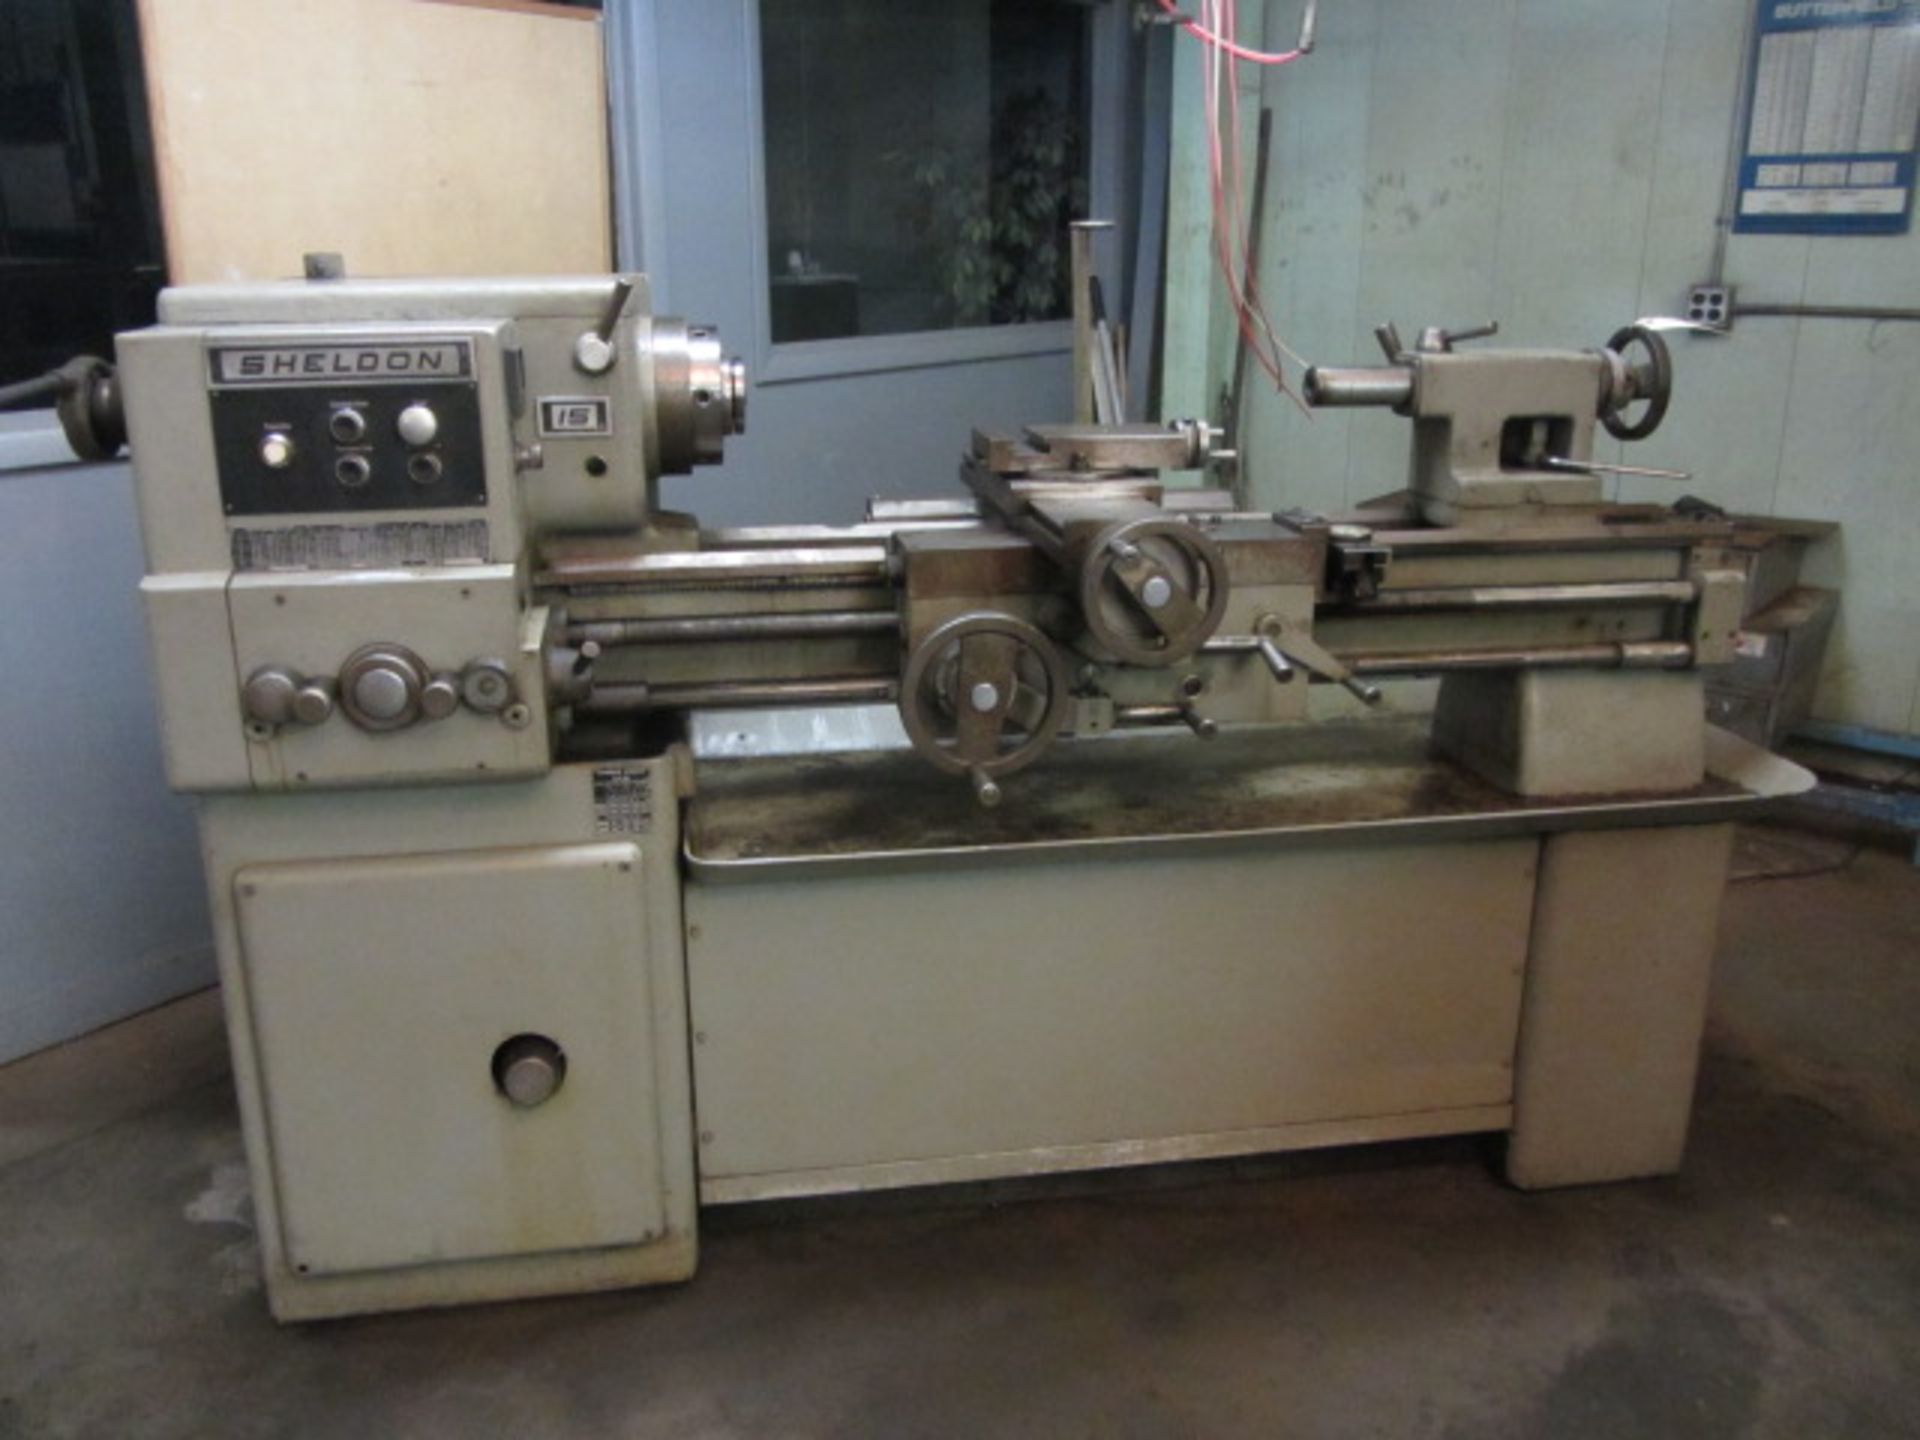 Sheldon Model 15 16'' x 46'' CC Engine Lathe with Spindle Speeds to 1250 RPM, Chip Pan, 5C Collet